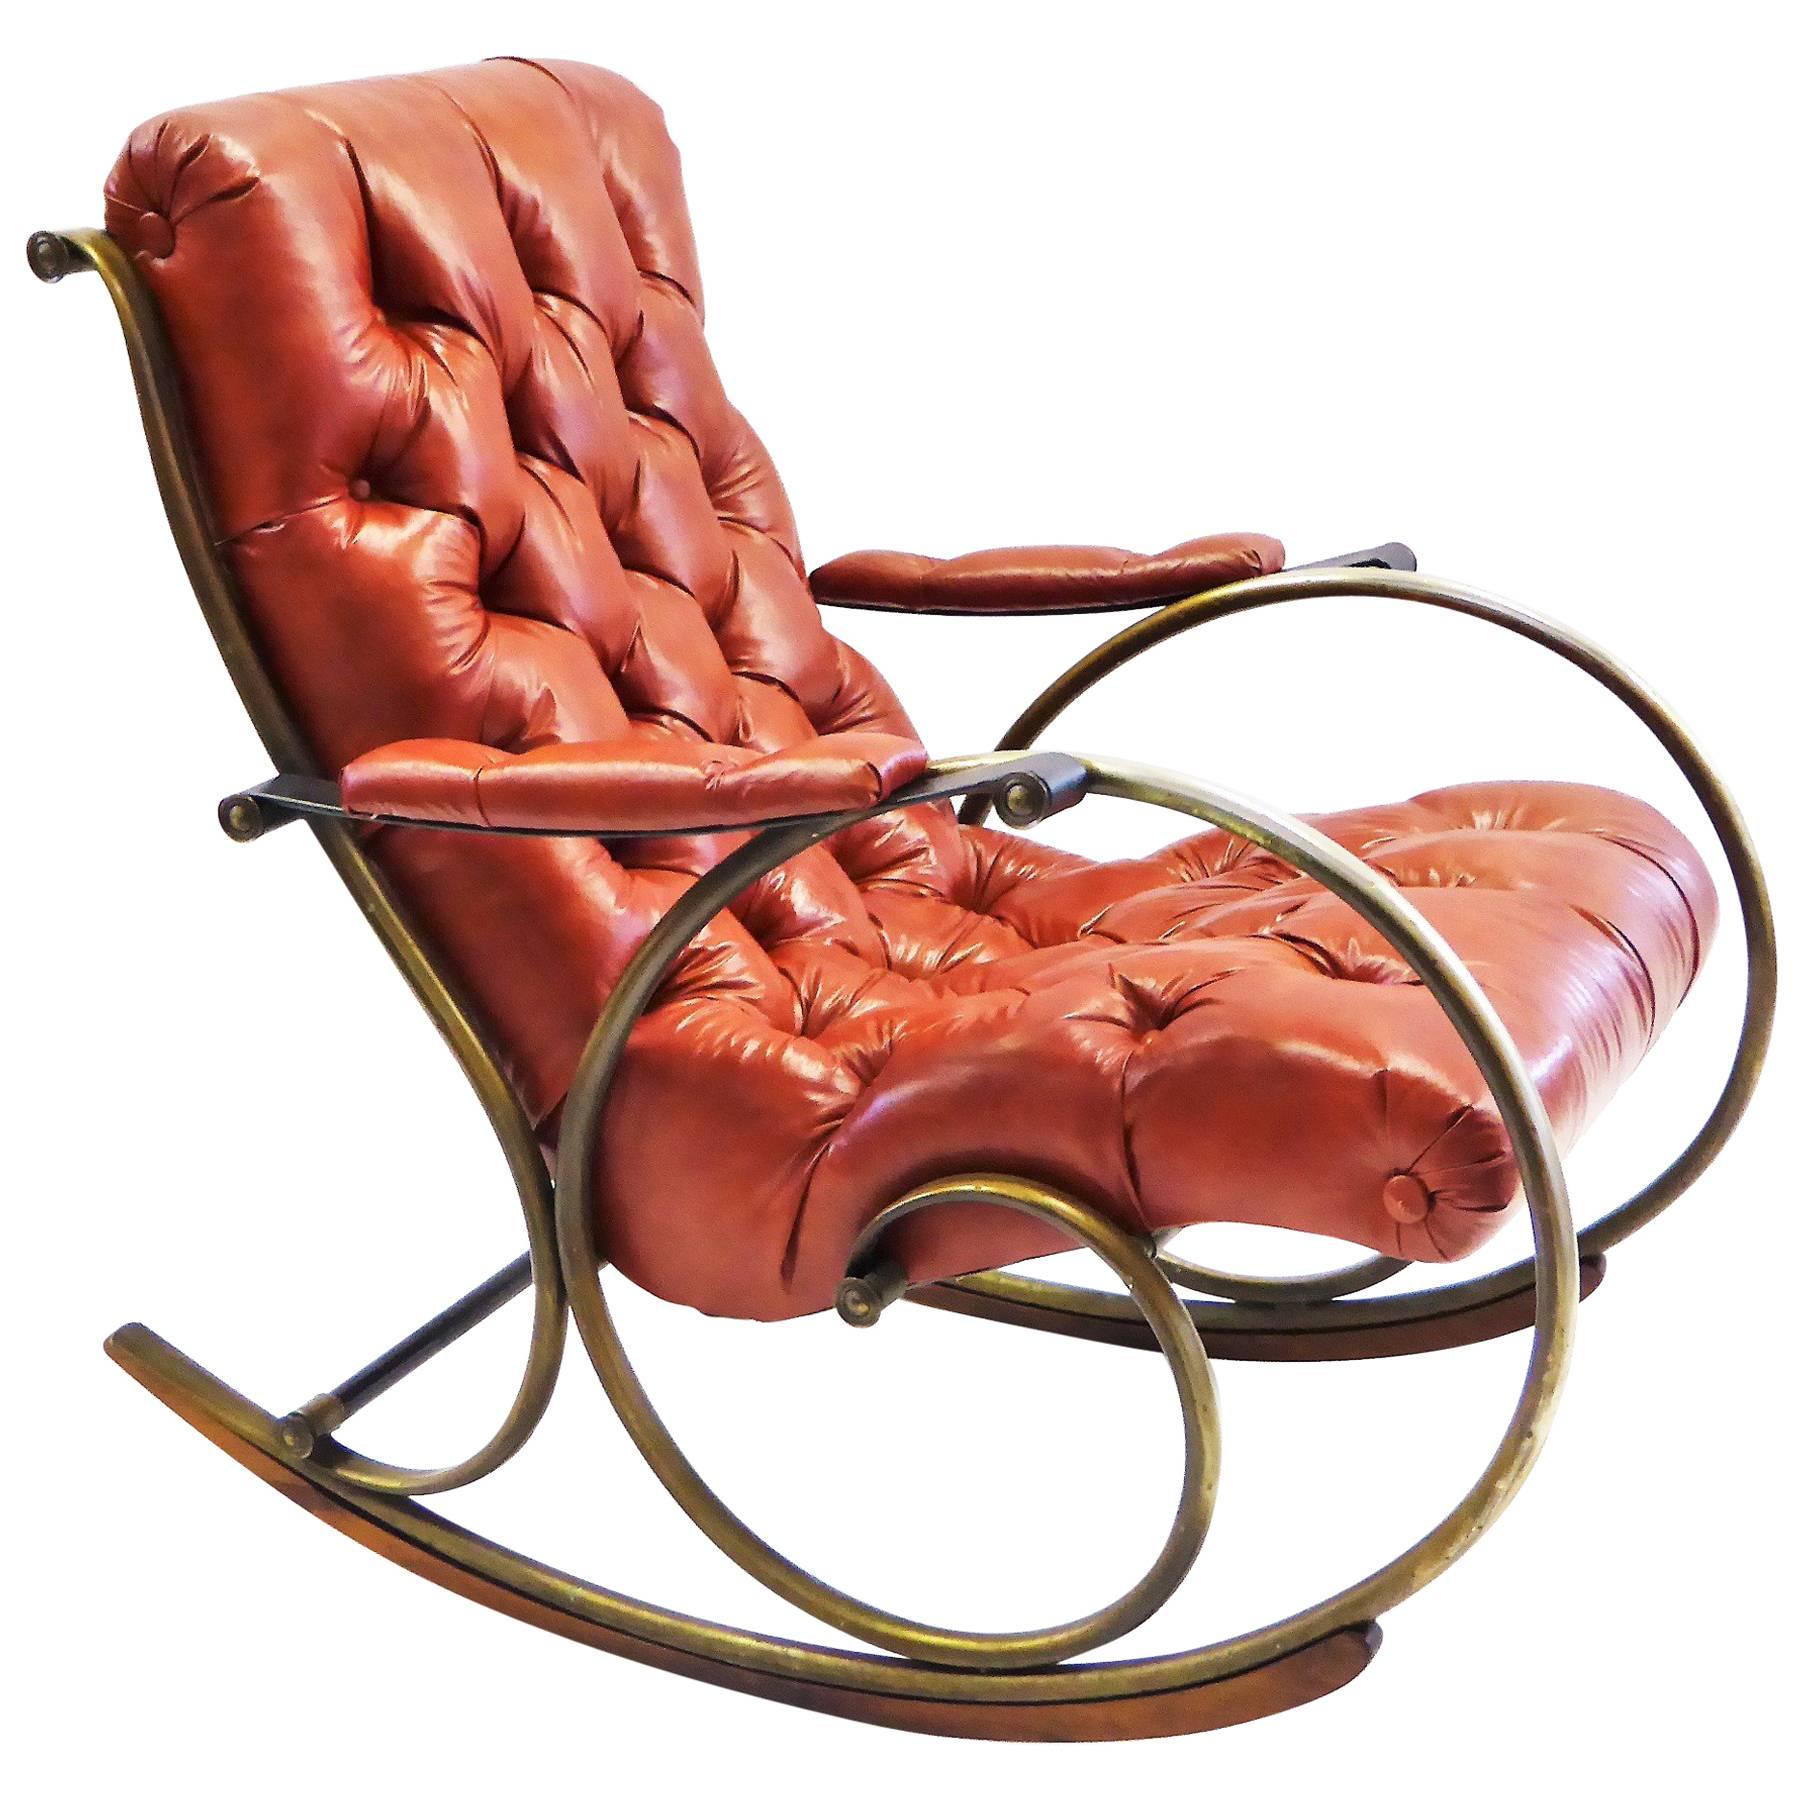 1970s Lee Woodard Sculptural Tufted Leatherette Rocking Chair